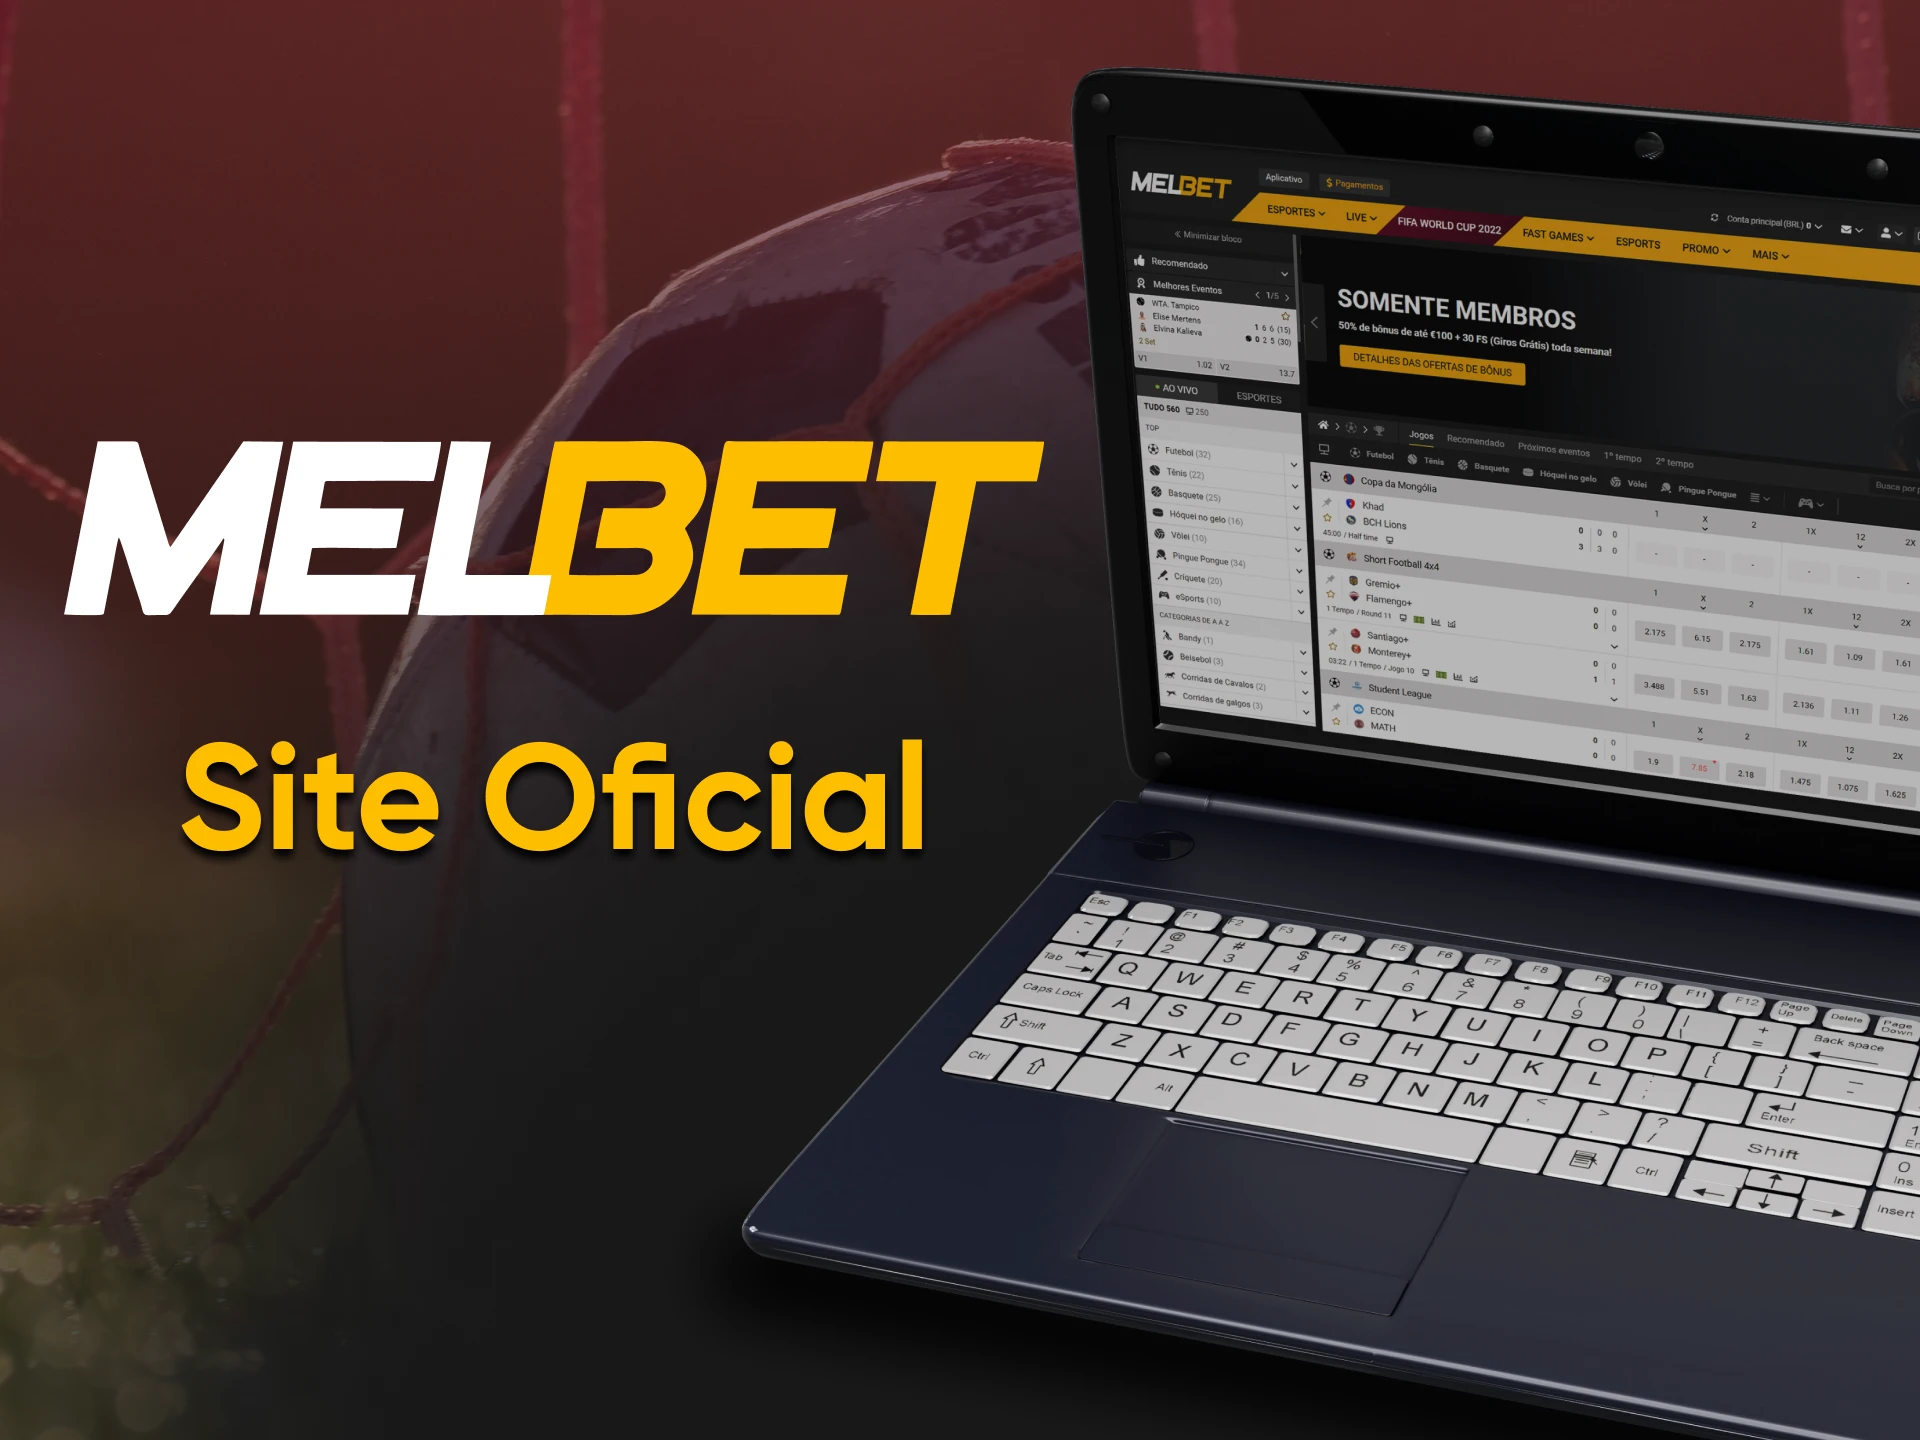 To bet, you can visit the web version of Melbet.